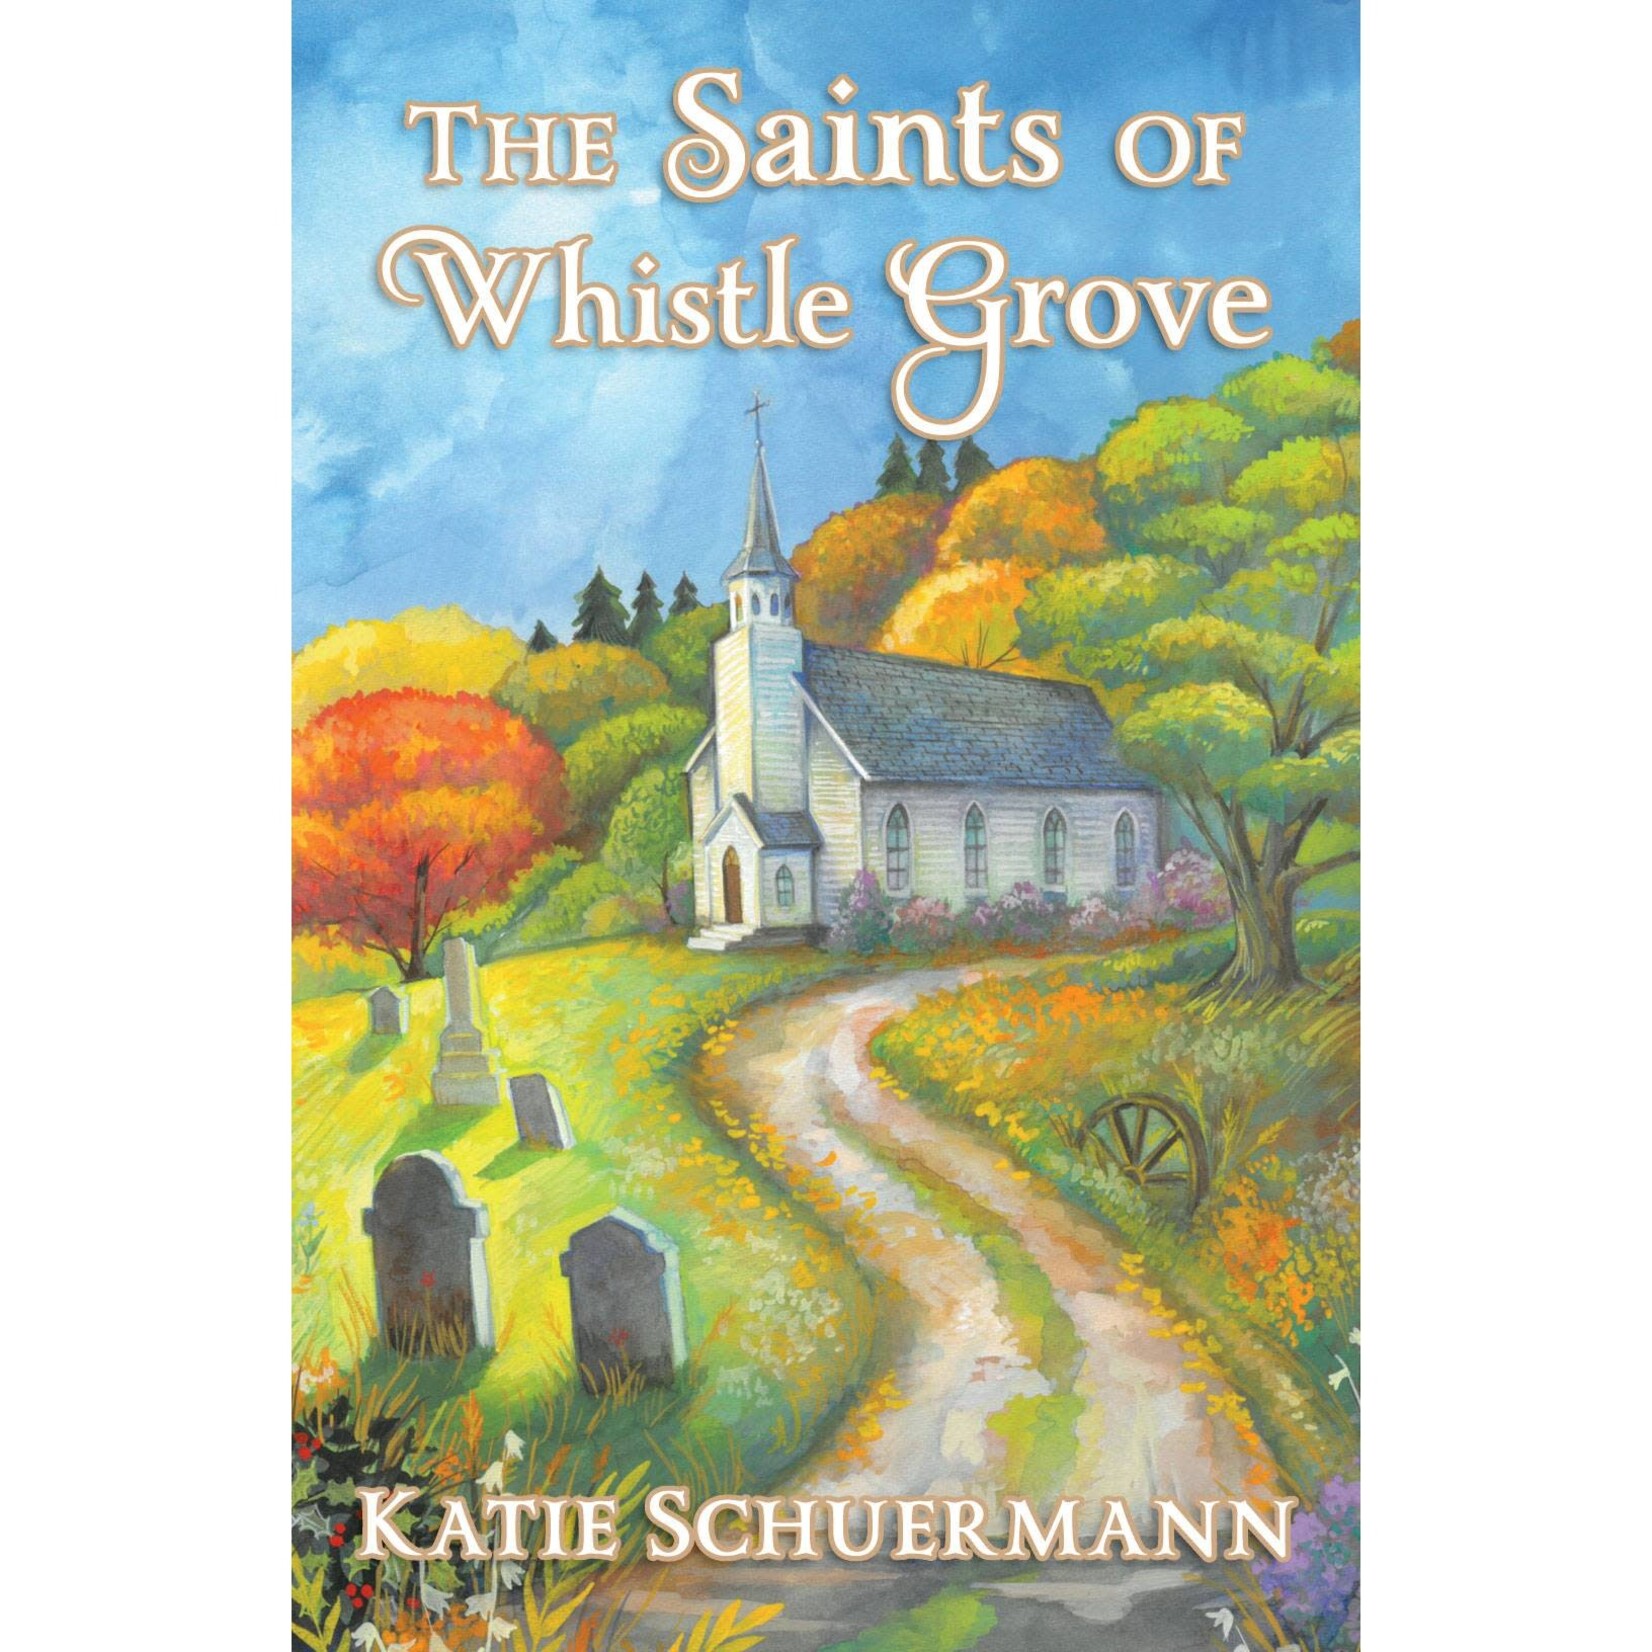 The Saints of Whistle Grove